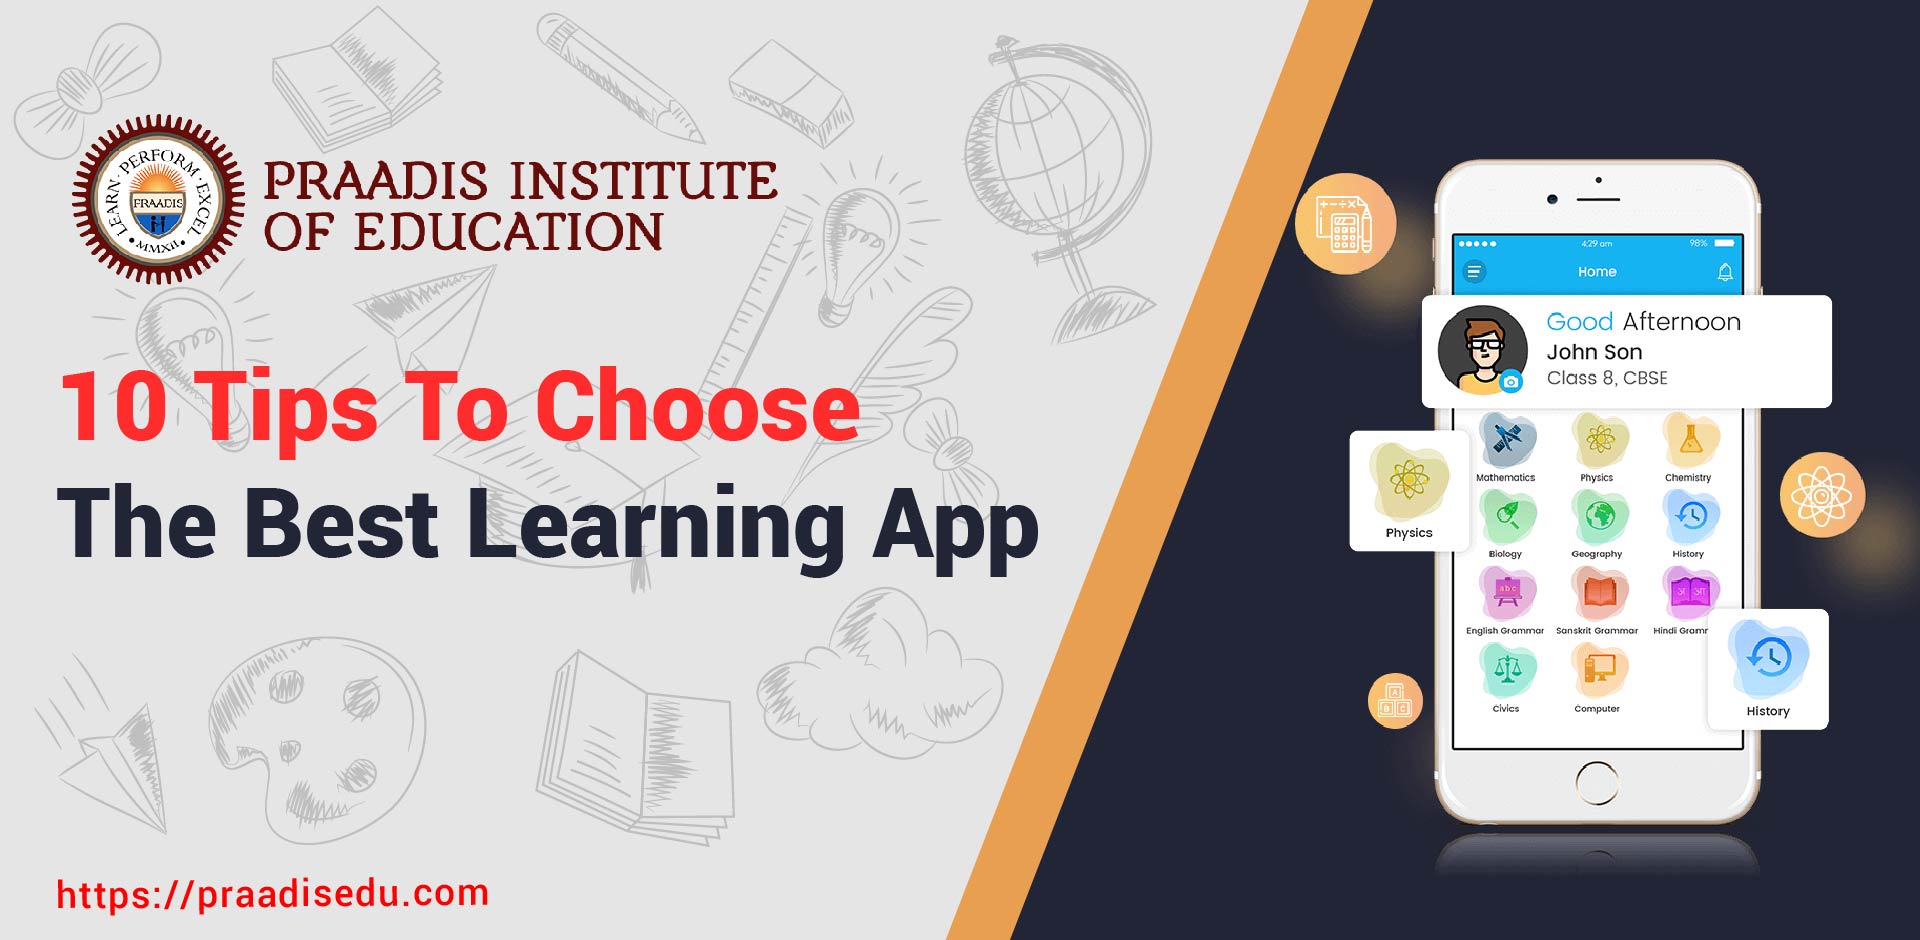 10 Tips To Choose The Best Learning App